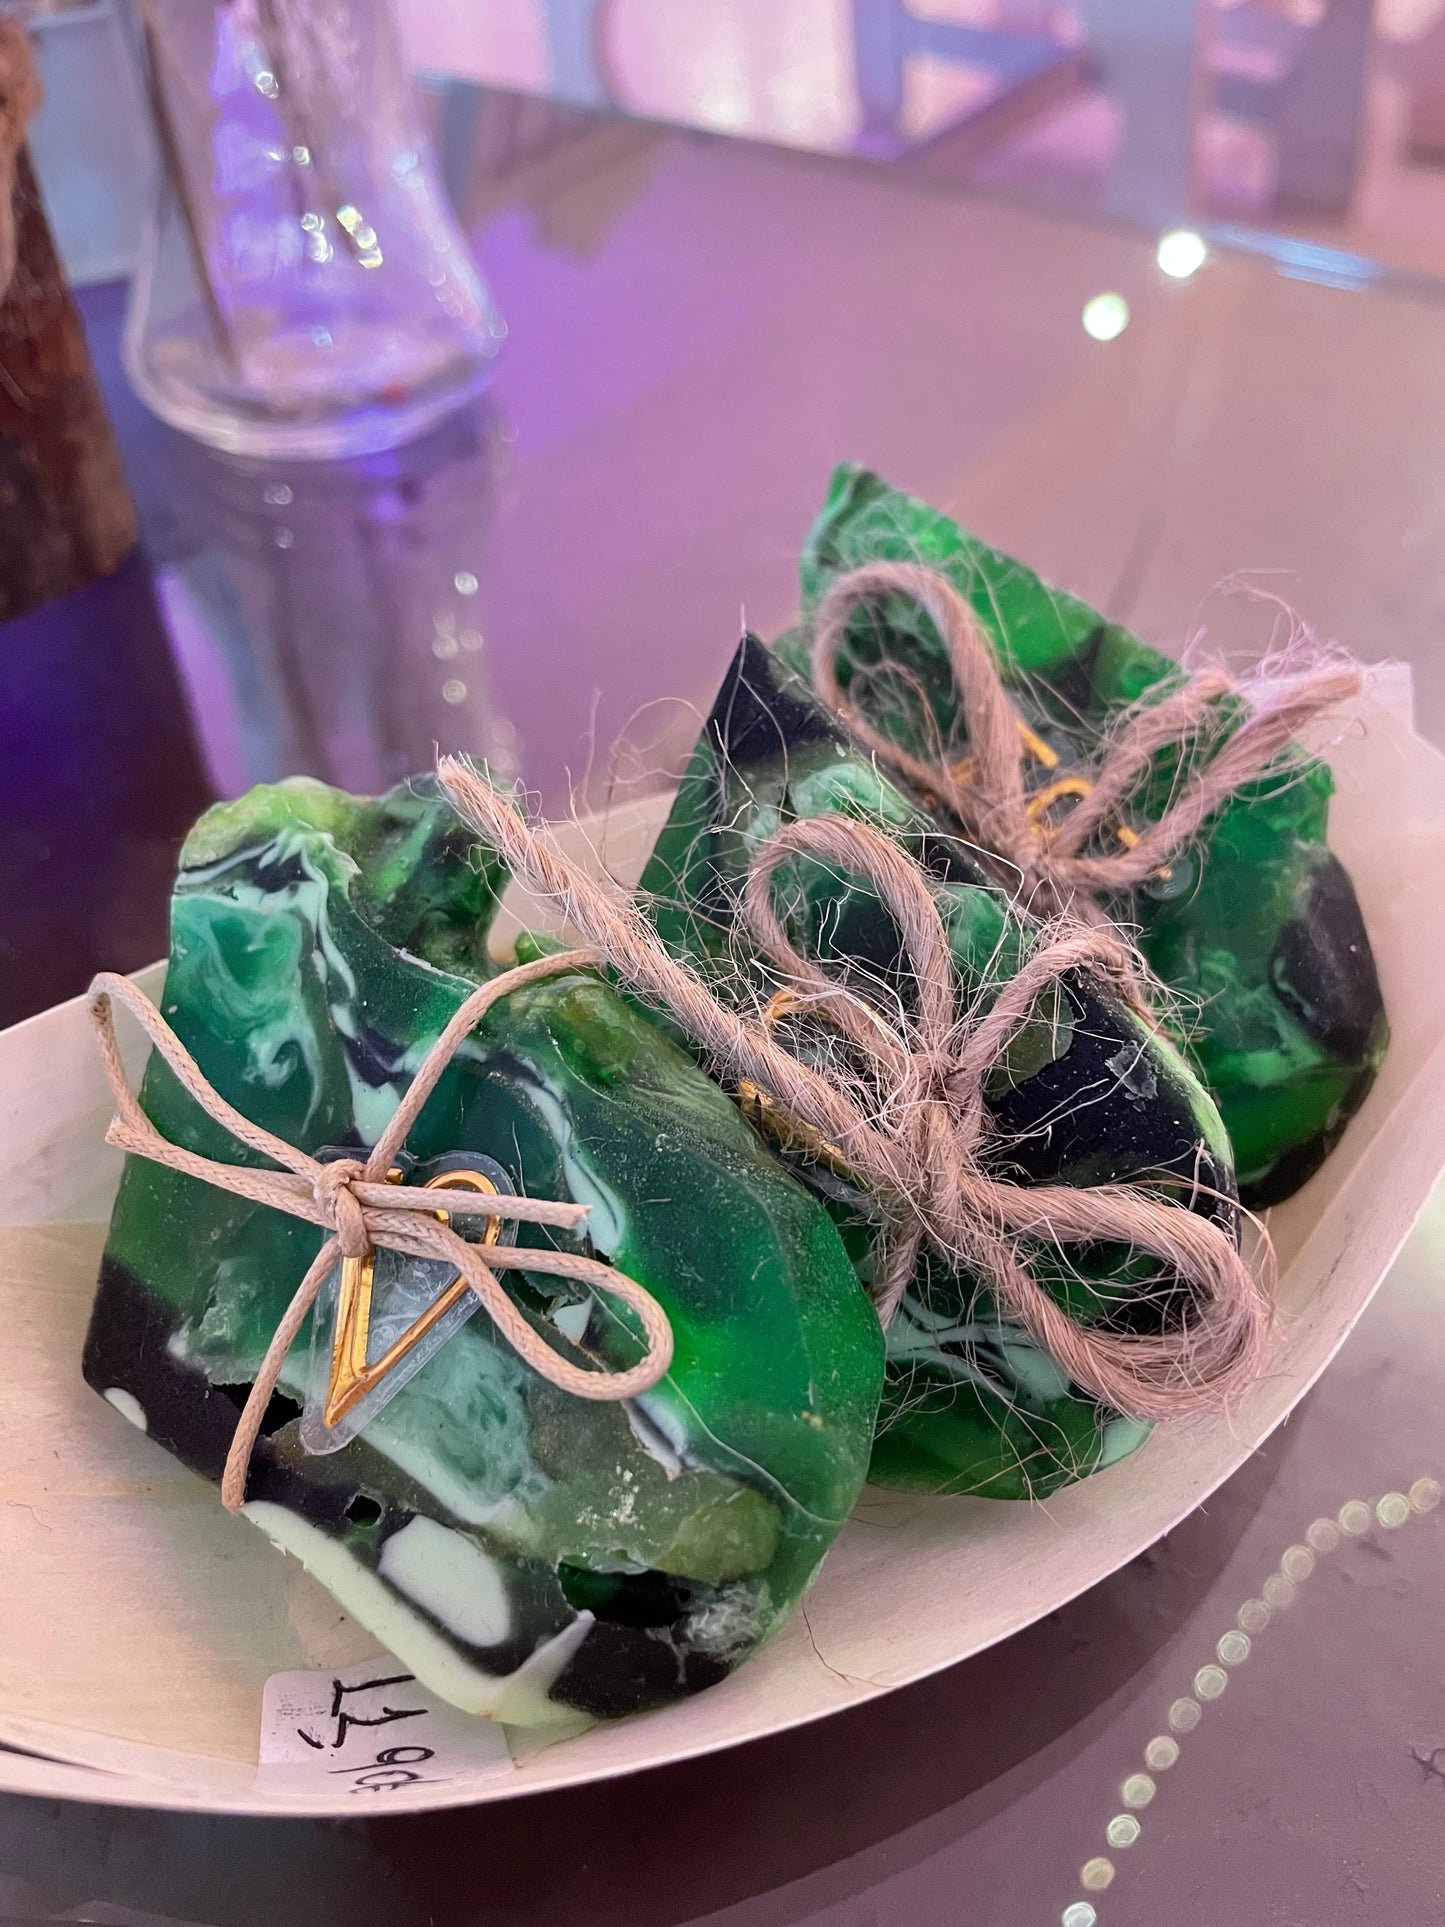 Set of 3 Malachite Bliss Glycerin Soaps with Aloe Vera, Black Clay, and Confectionery Colors